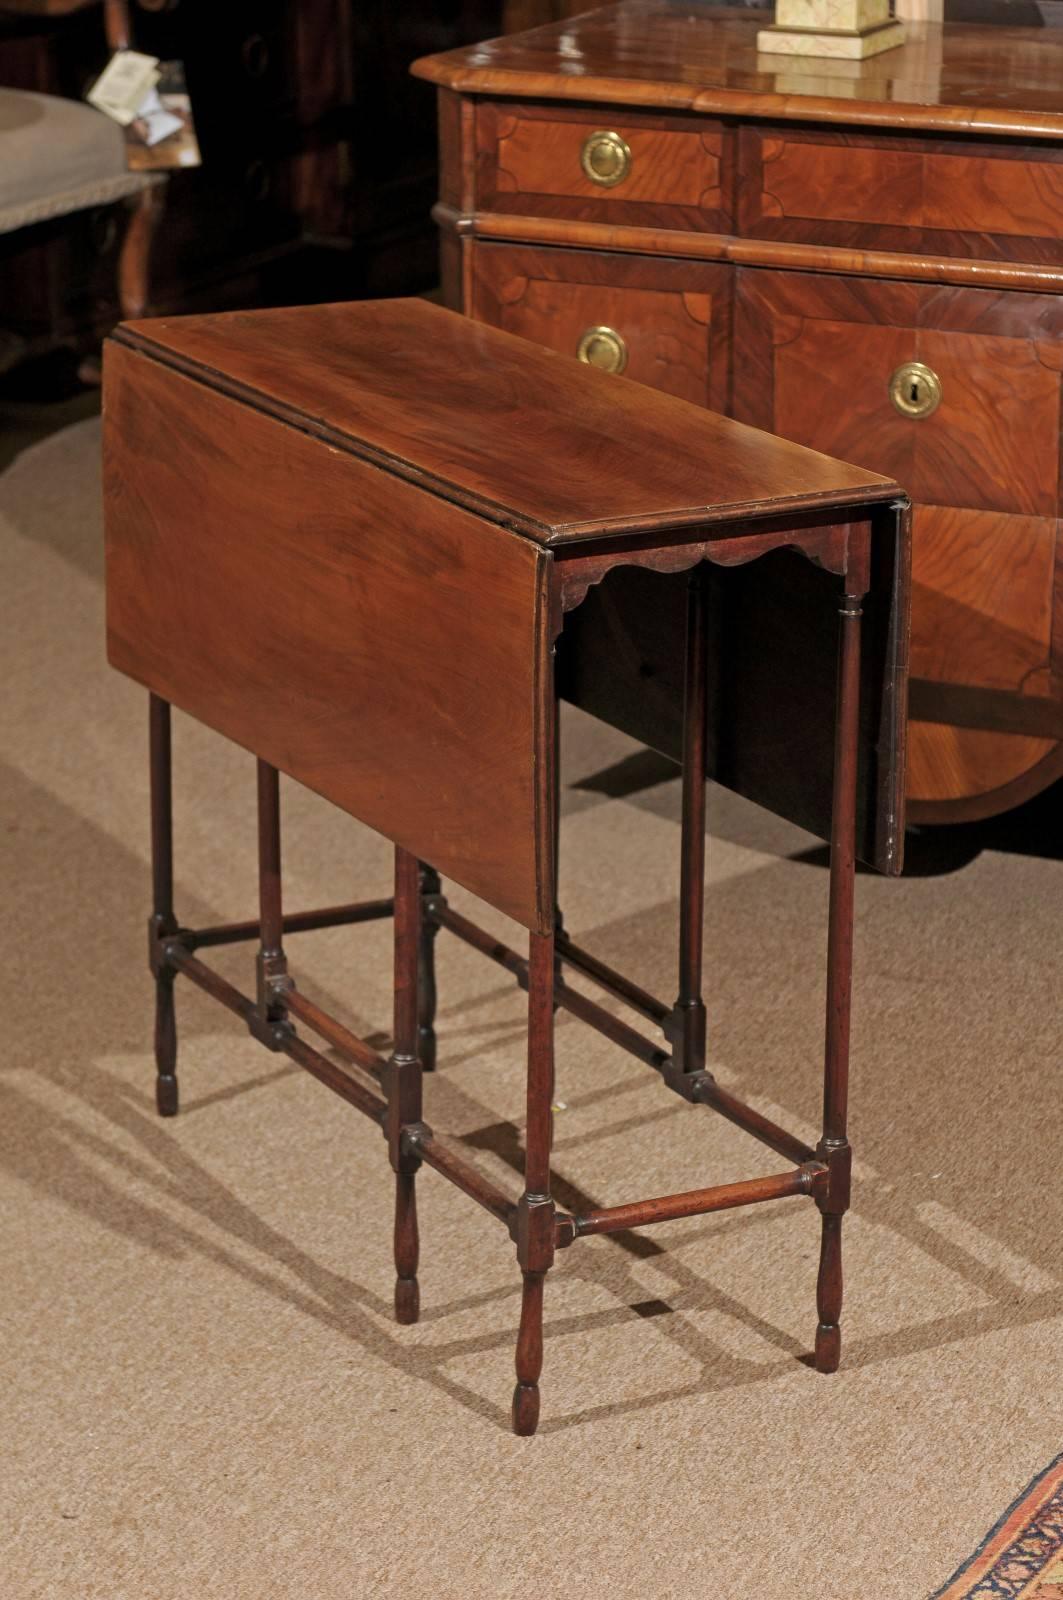 Early 19th century George II style spider leg drop-leaf table in mahogany, England.